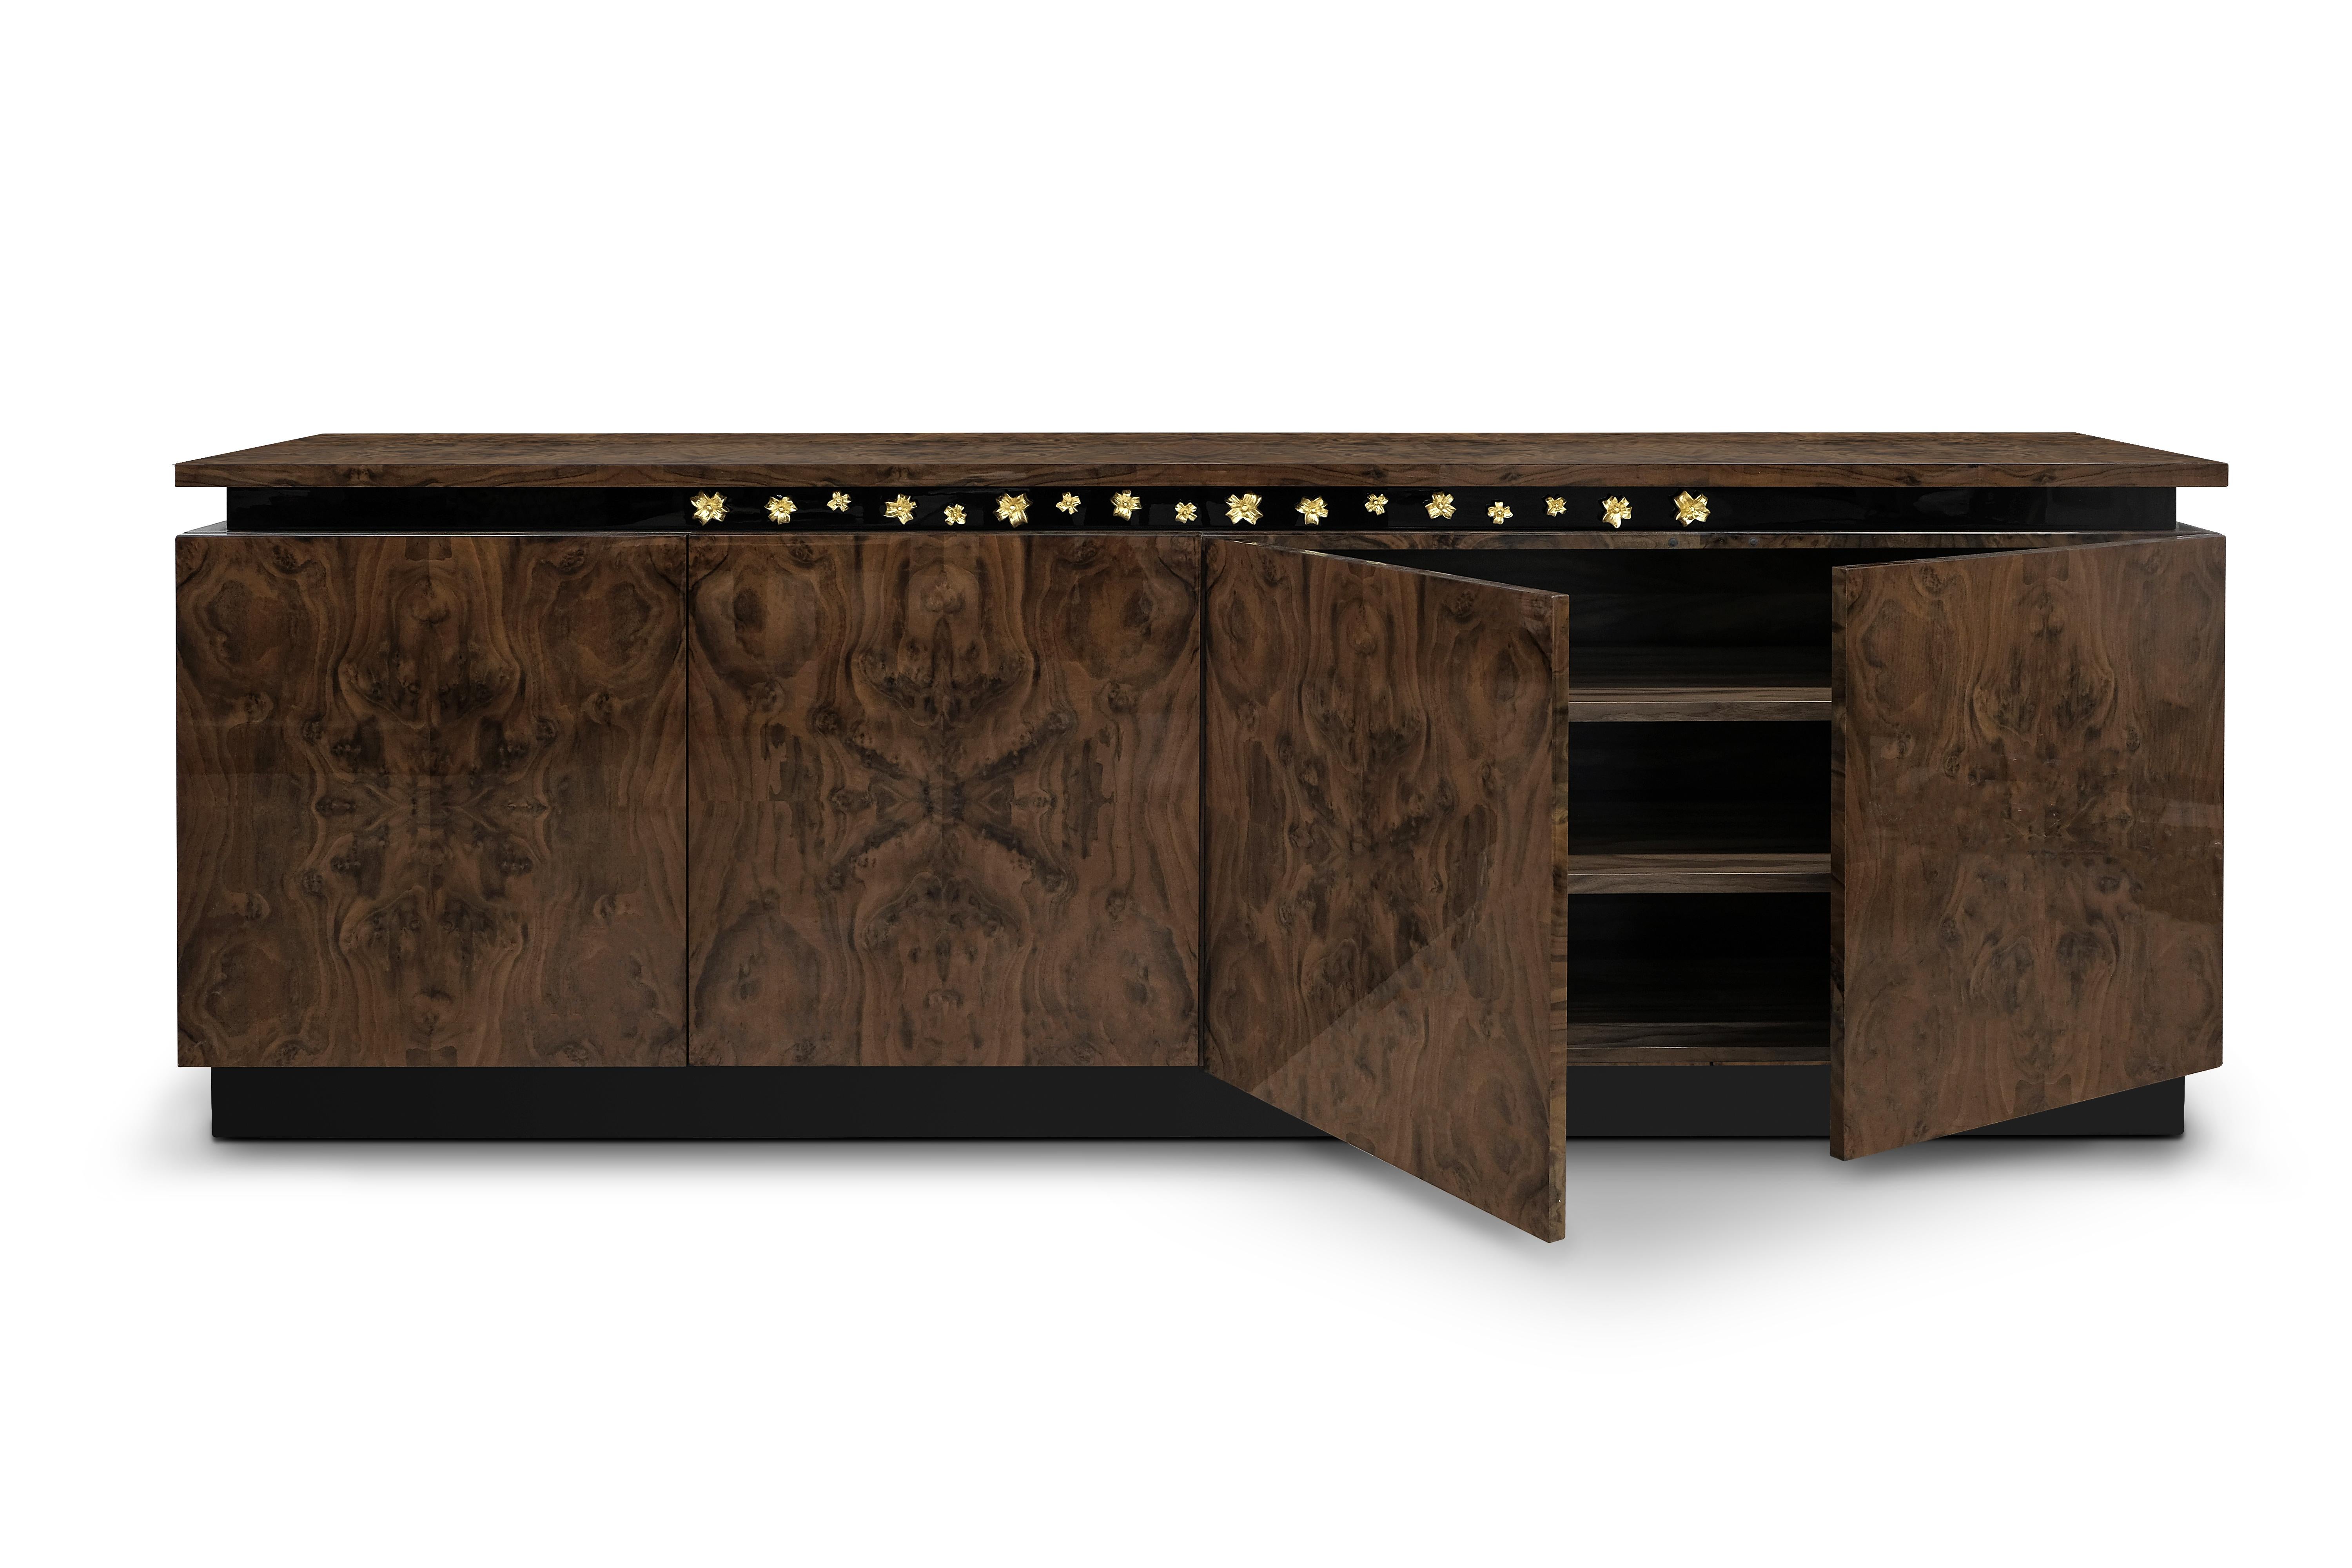 Malabar designed the Figen contemporary sideboard inspired by baroque ornaments in architecture and artifacts. The baroque was a period of artistic style that used exaggerated motion and clear easily interpreted detail to produce drama. One of the